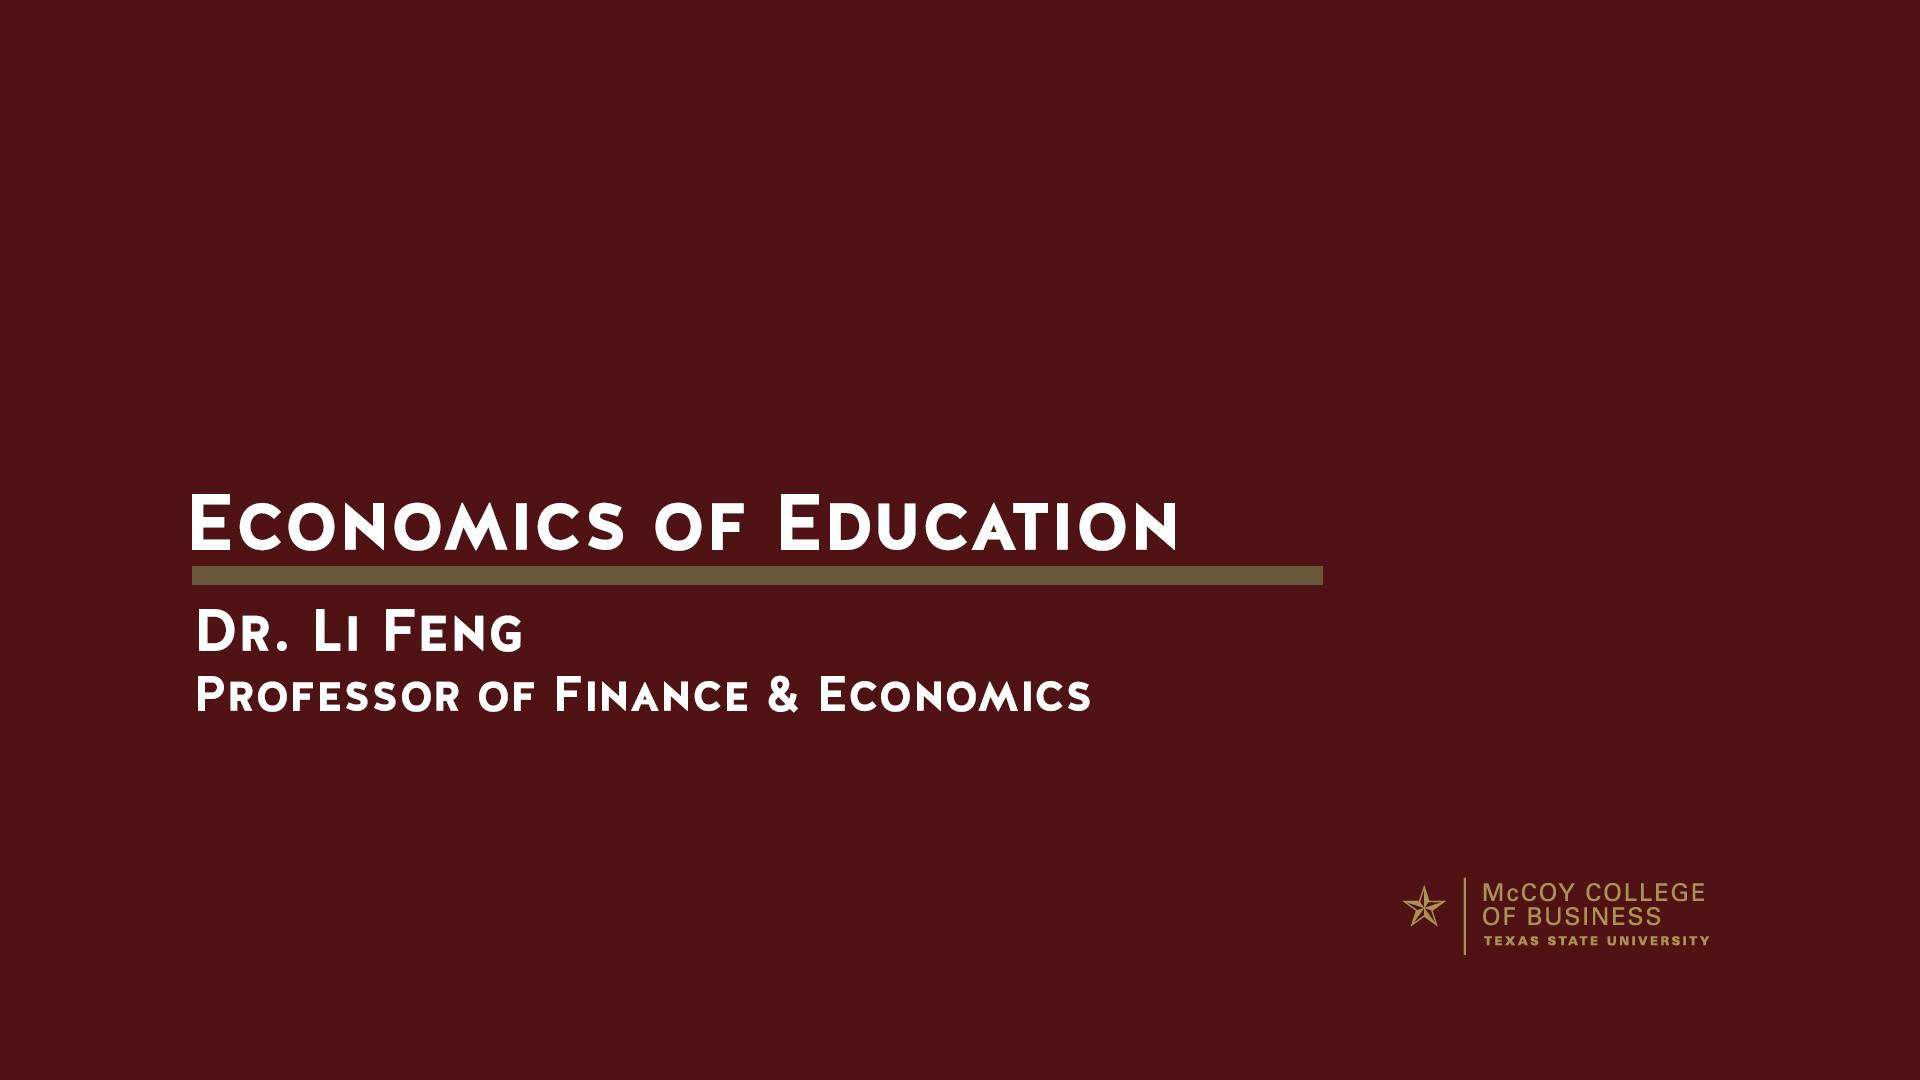 Dr. Li Feng discusses her research on the economics of education